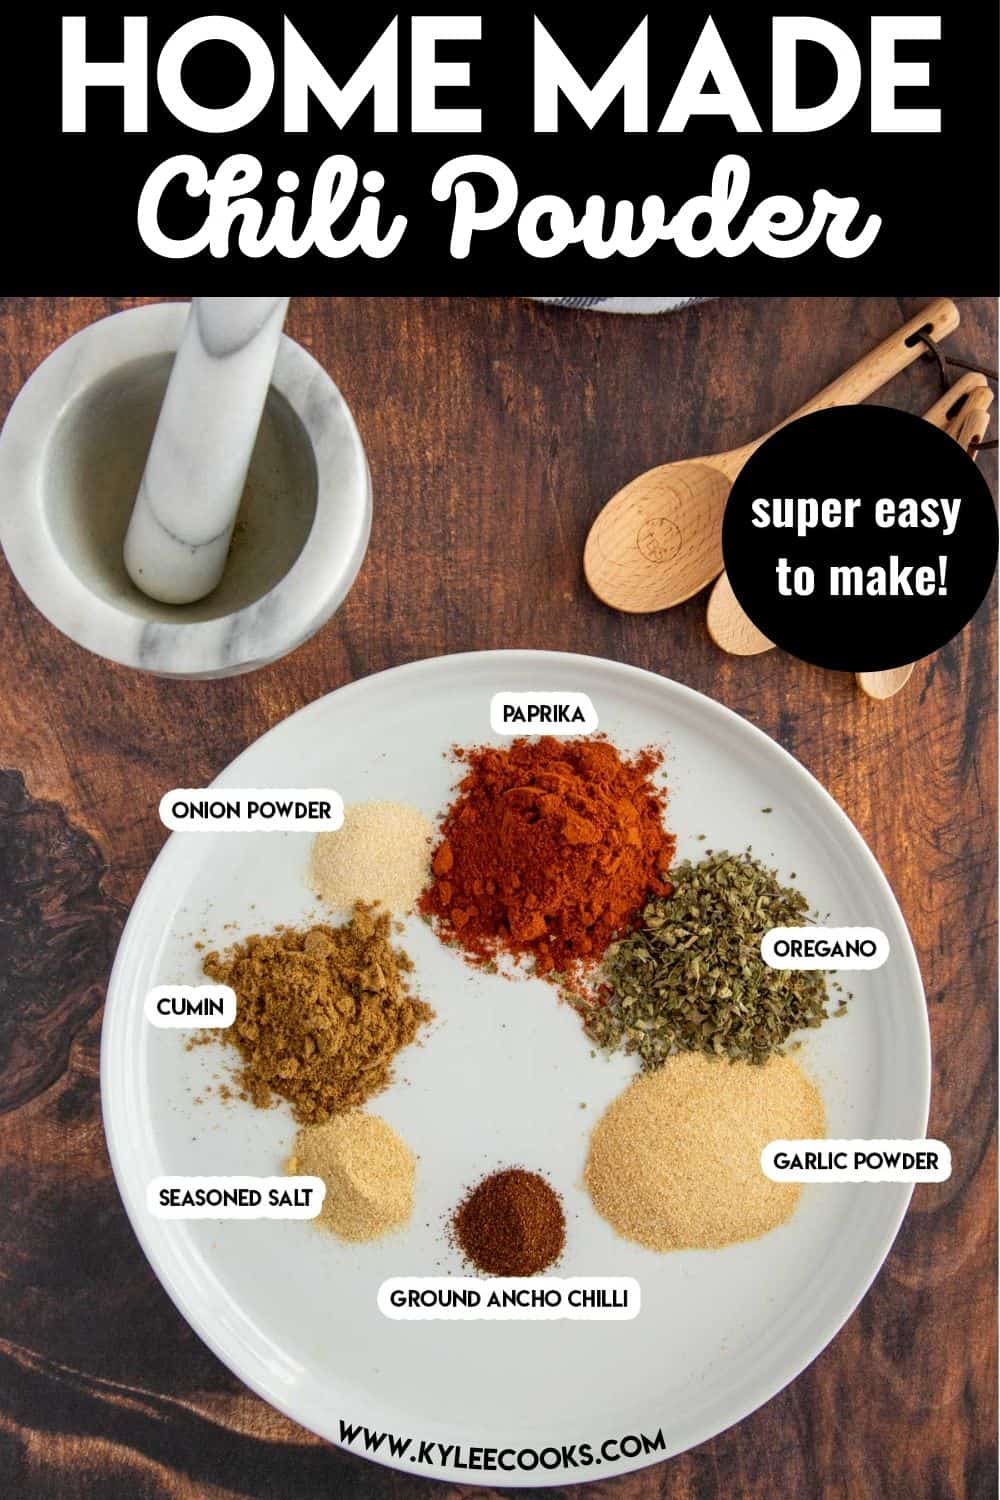 chili powder recipe with ingredients and text overlaid